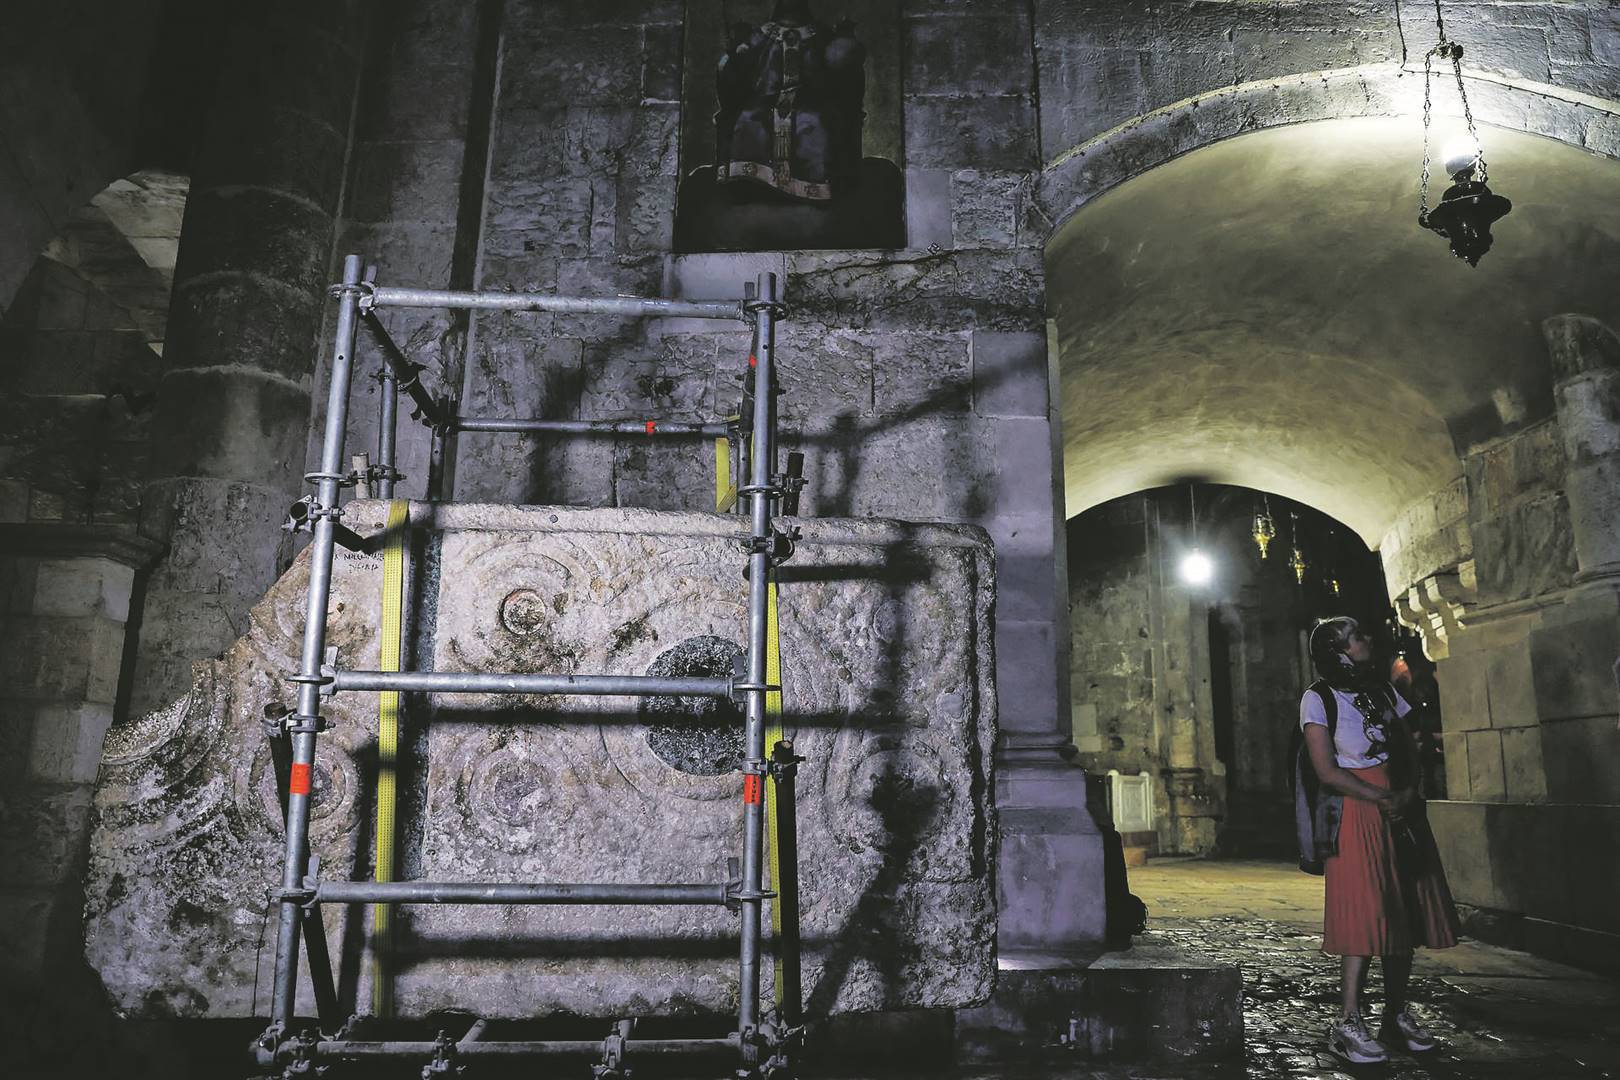  A stone slab said to be the decorated front of the Crusades-era high altar of the Church of the Holy Sepulchre Photo: Ronen Zvulun / reuters